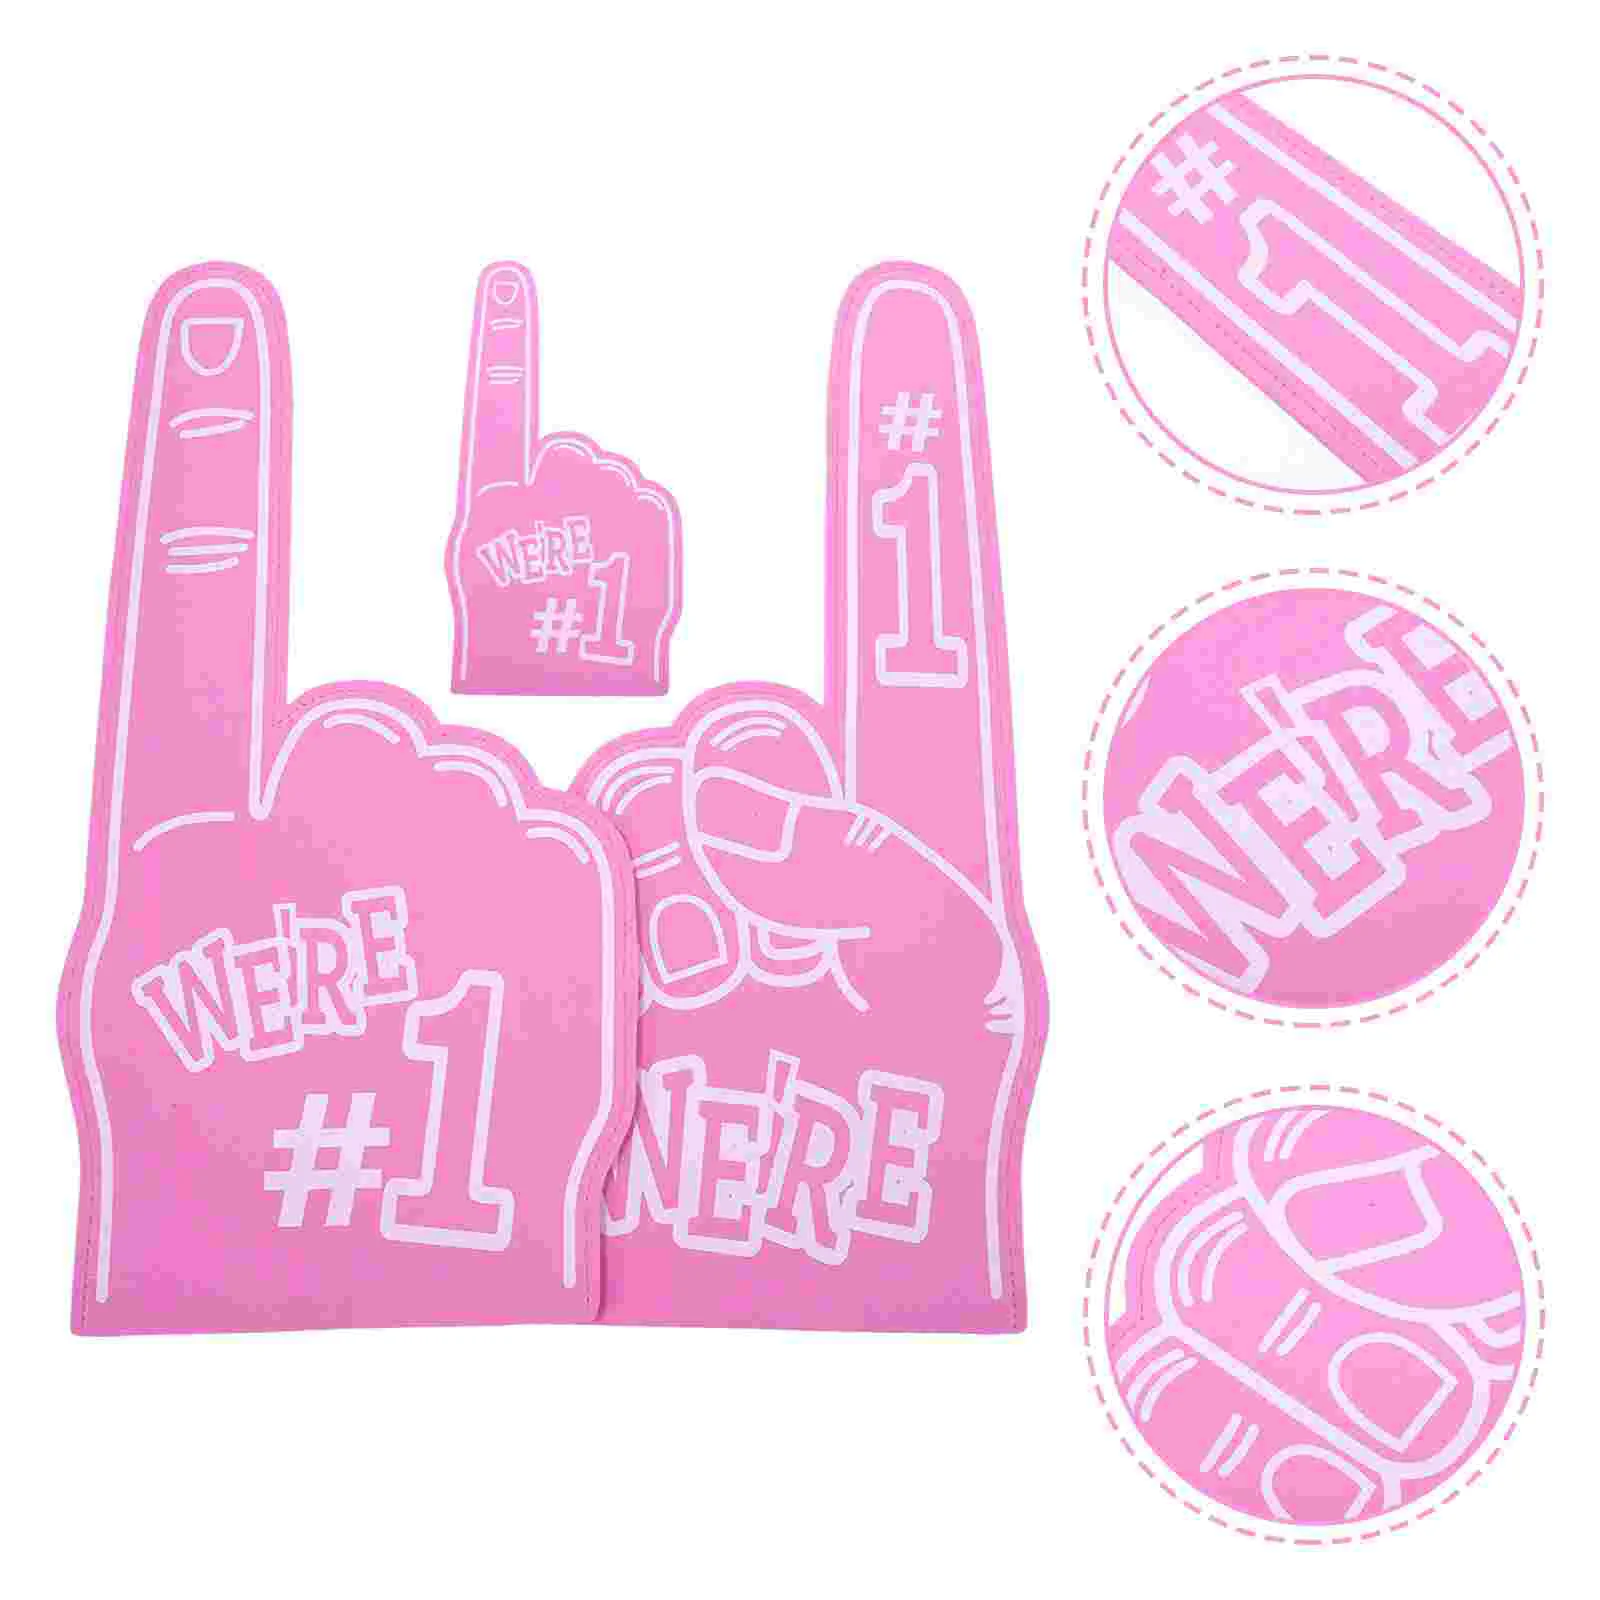 

3 Pcs Soccer Gloves Cheering Clapper Sports Toys Decorate Cheerleading Finger Foam Hands Fingers Child